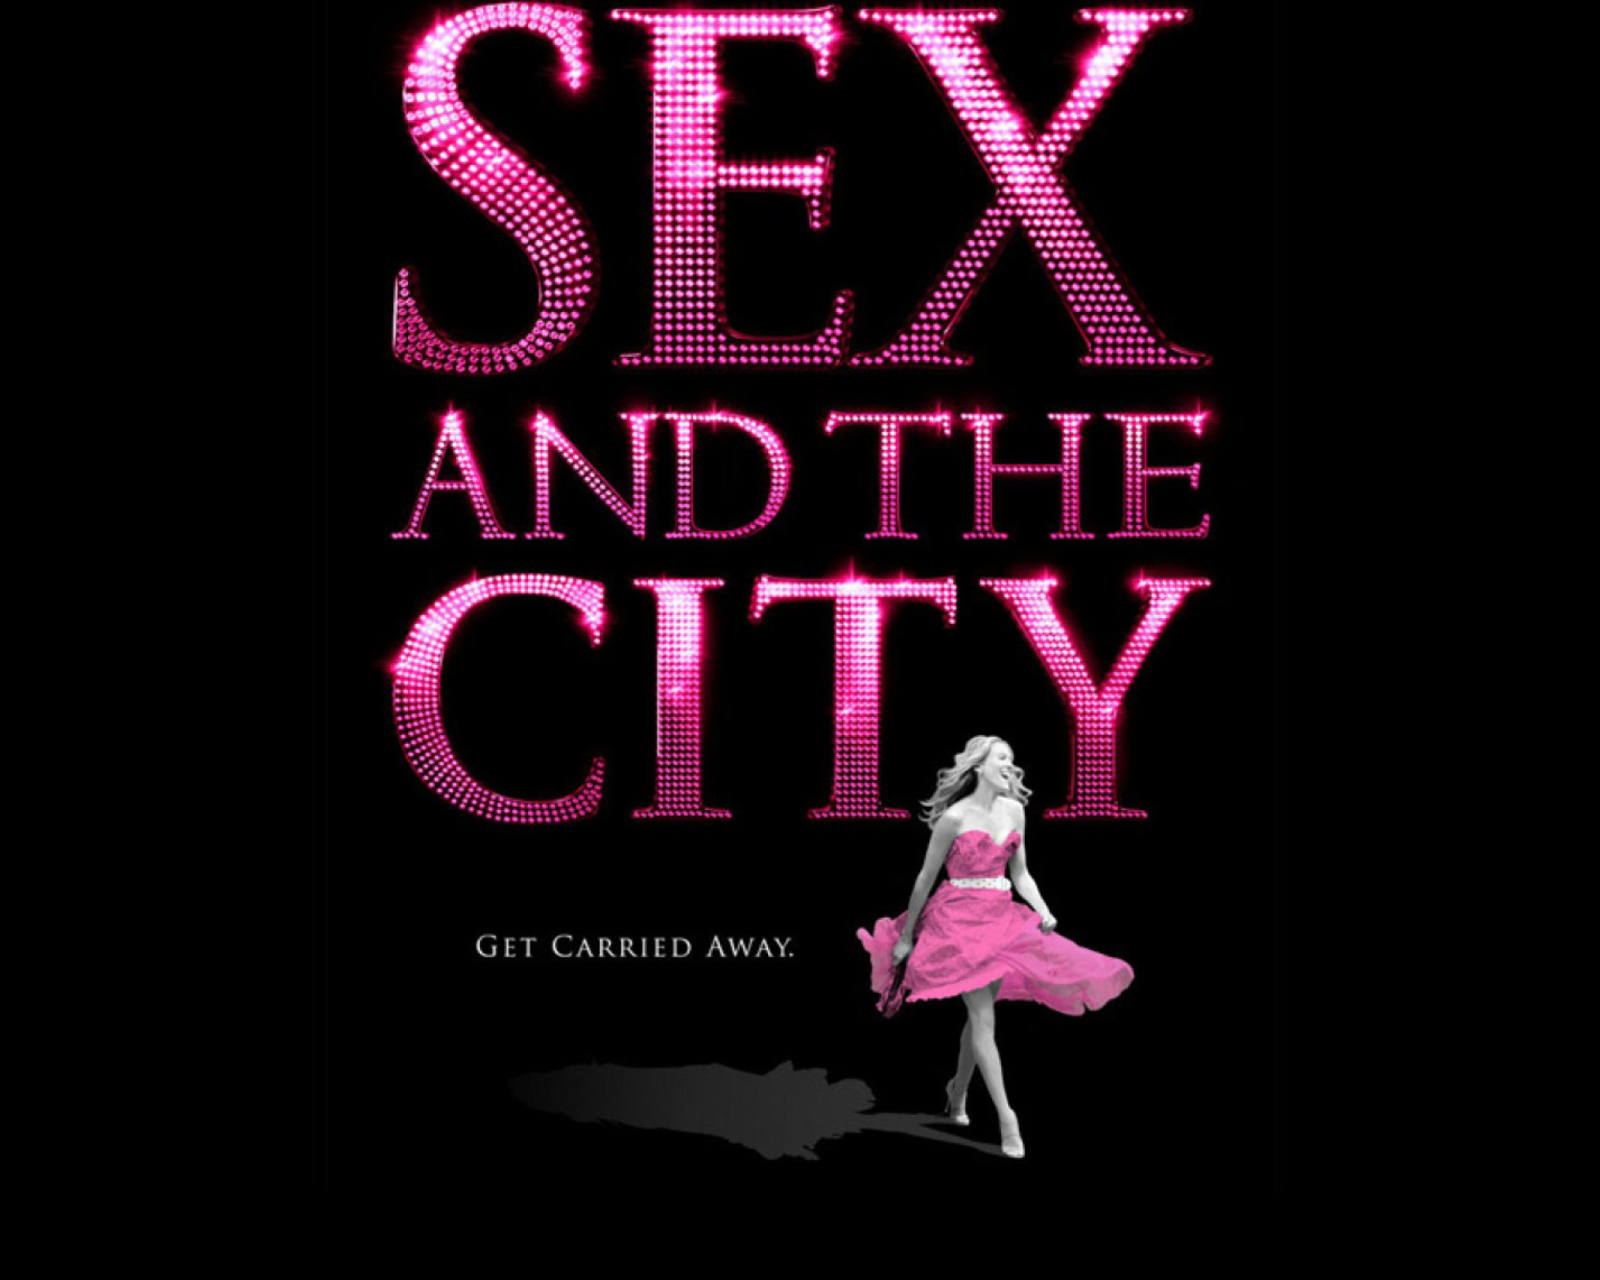 Sex And The City wallpaper 1600x1280